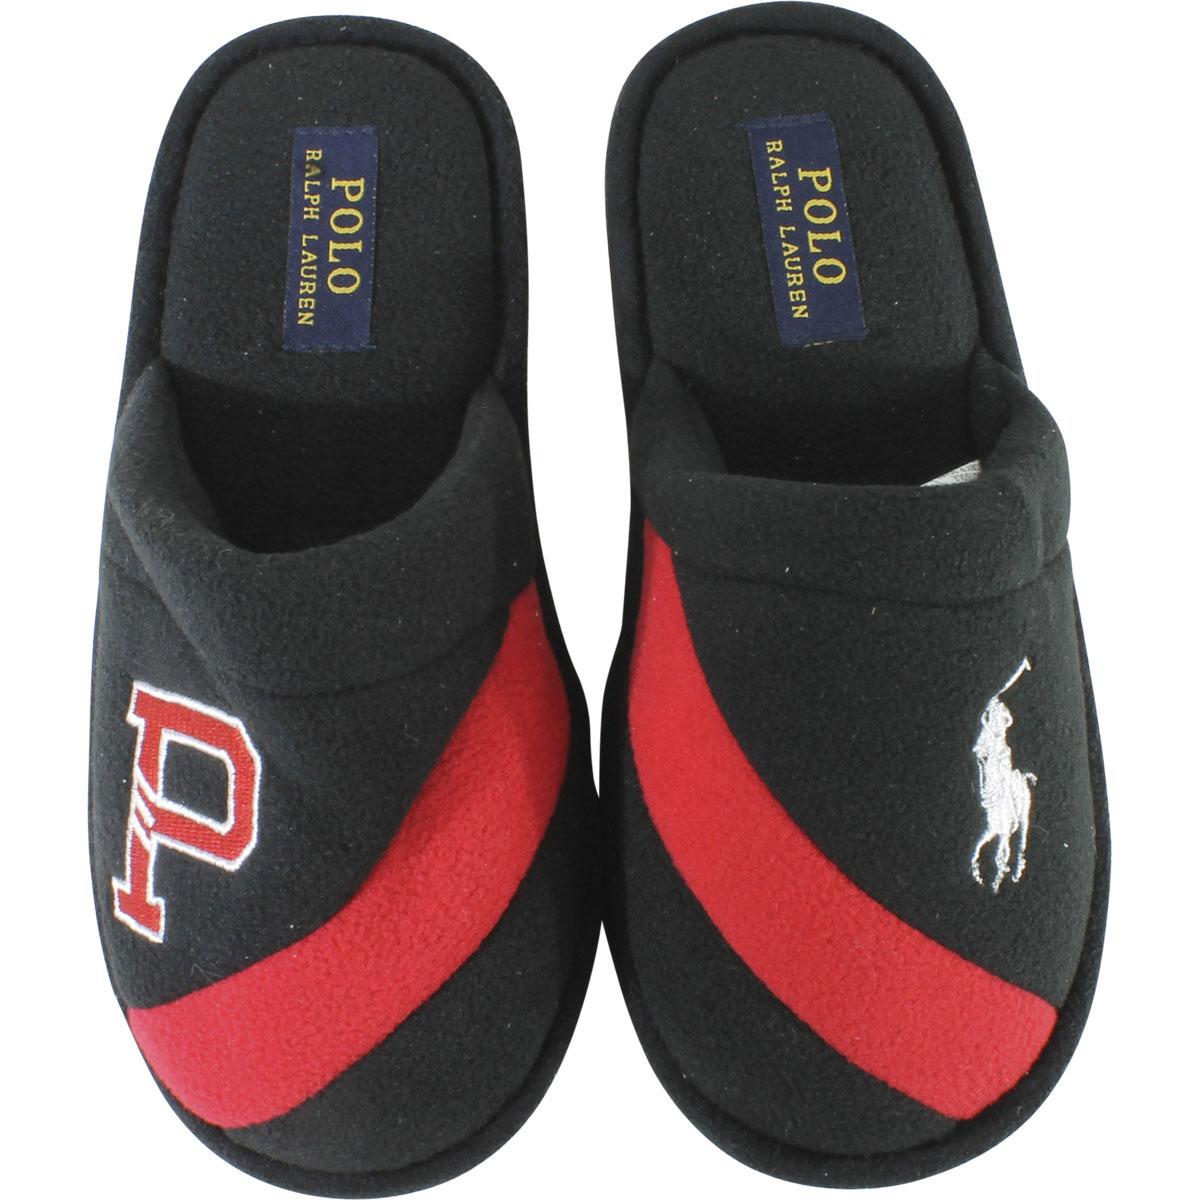 red polo slippers